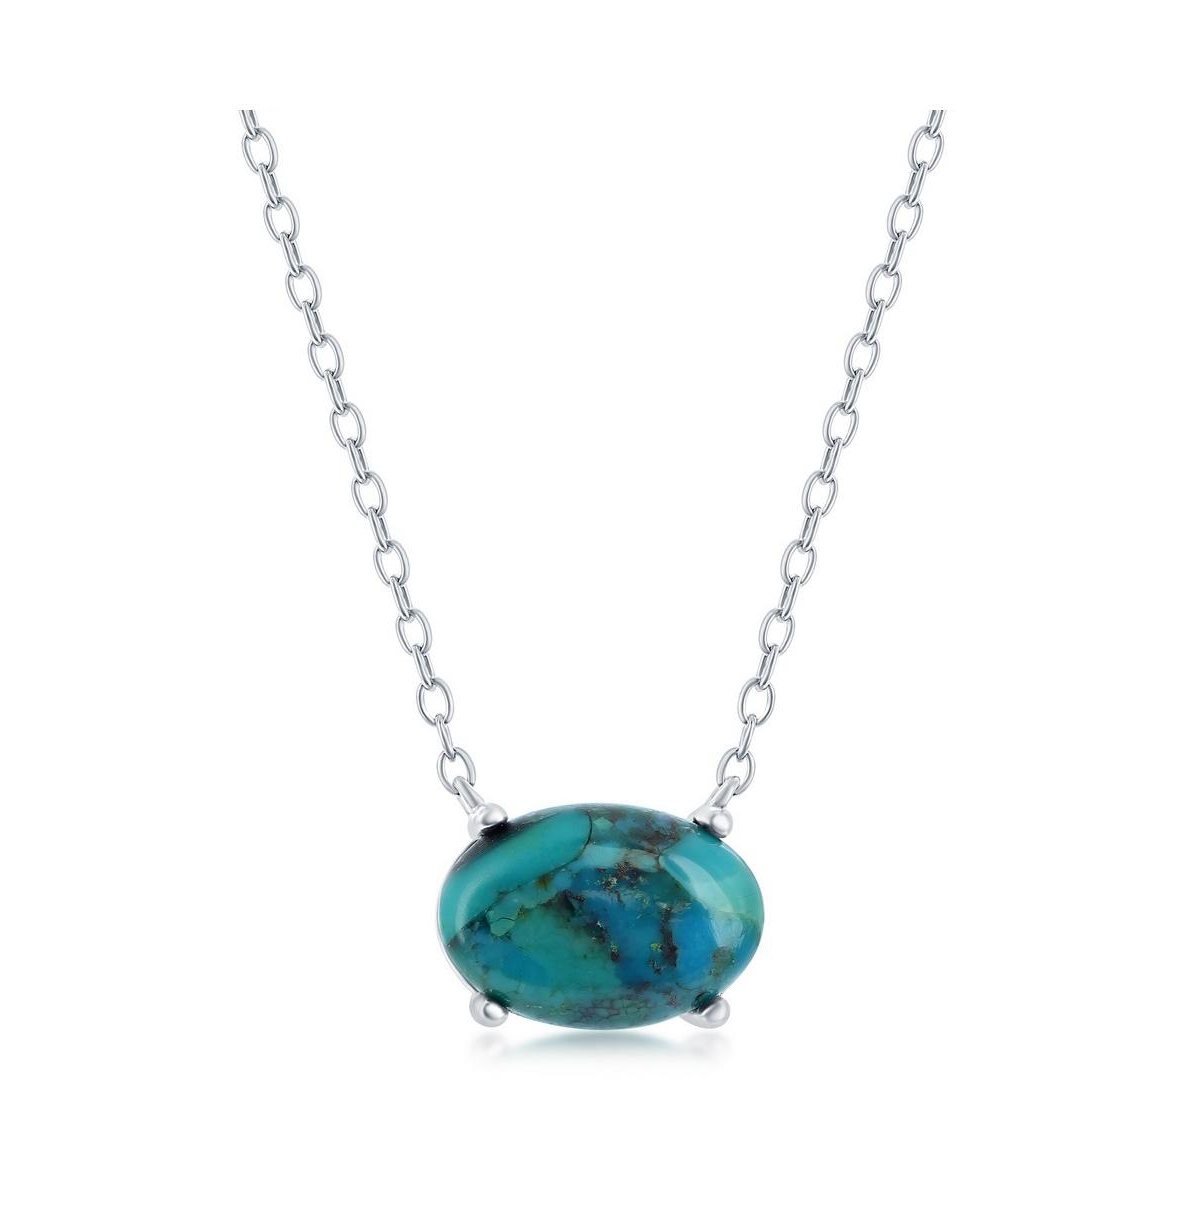 Sterling Silver Oval Reconstituted Turquoise Necklace - Turquoise/aqua